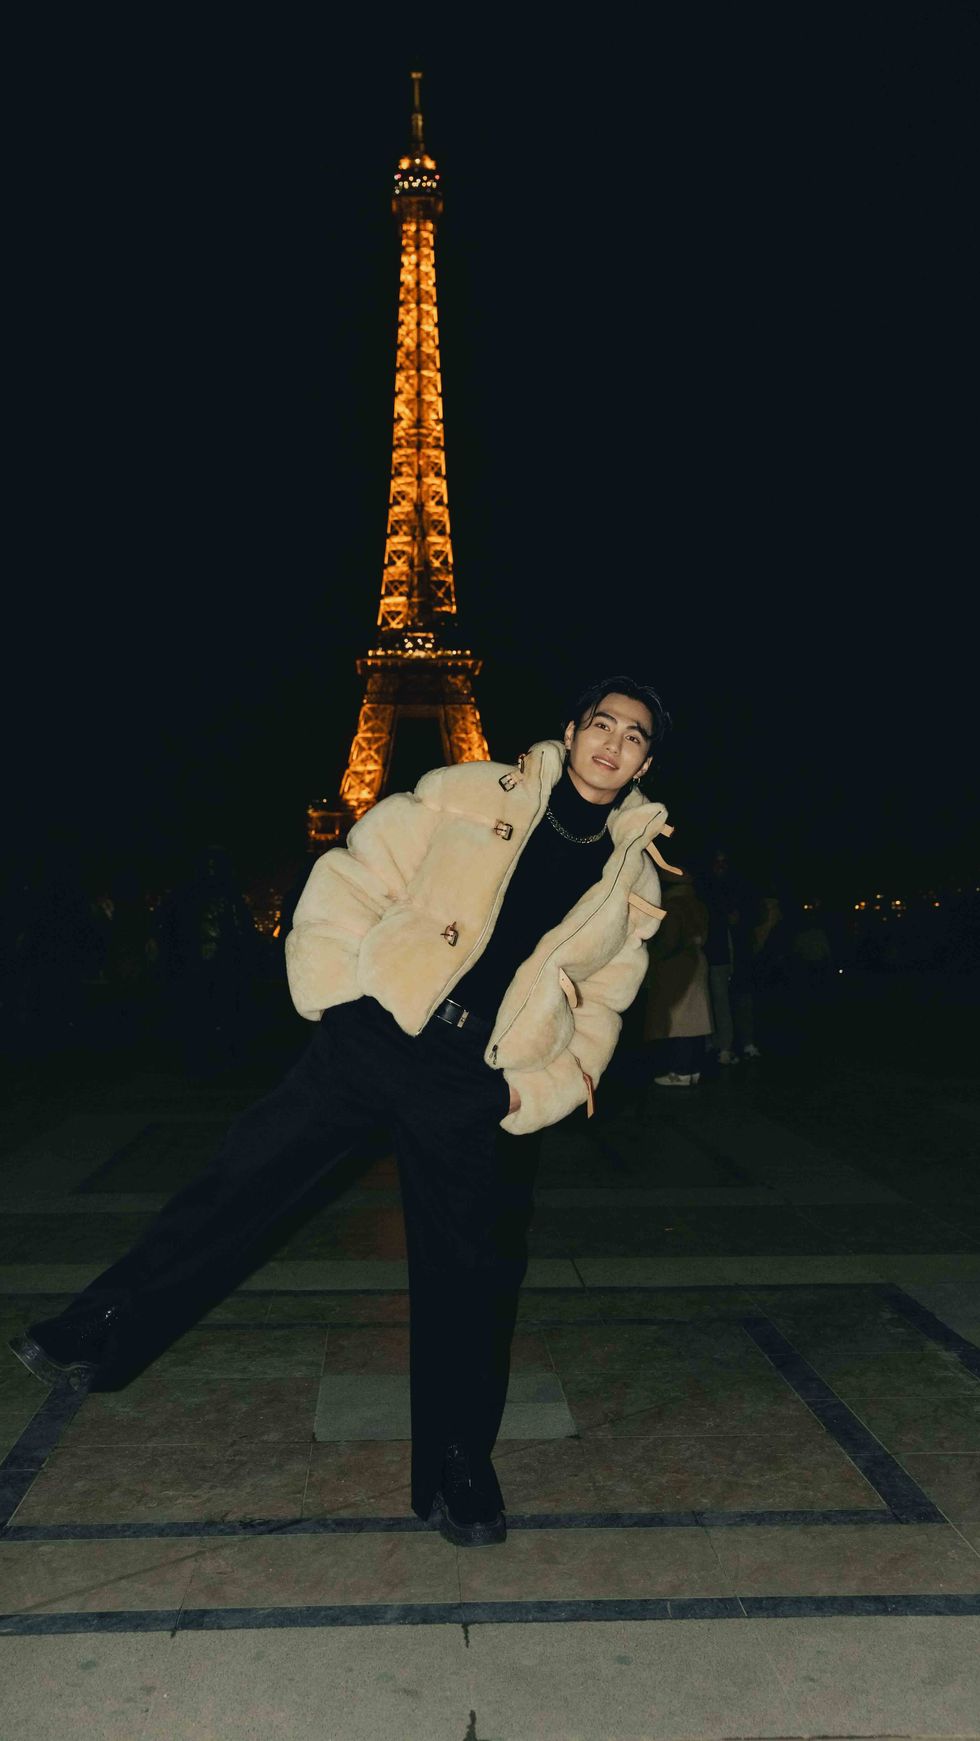 a person posing in front of a tall tower